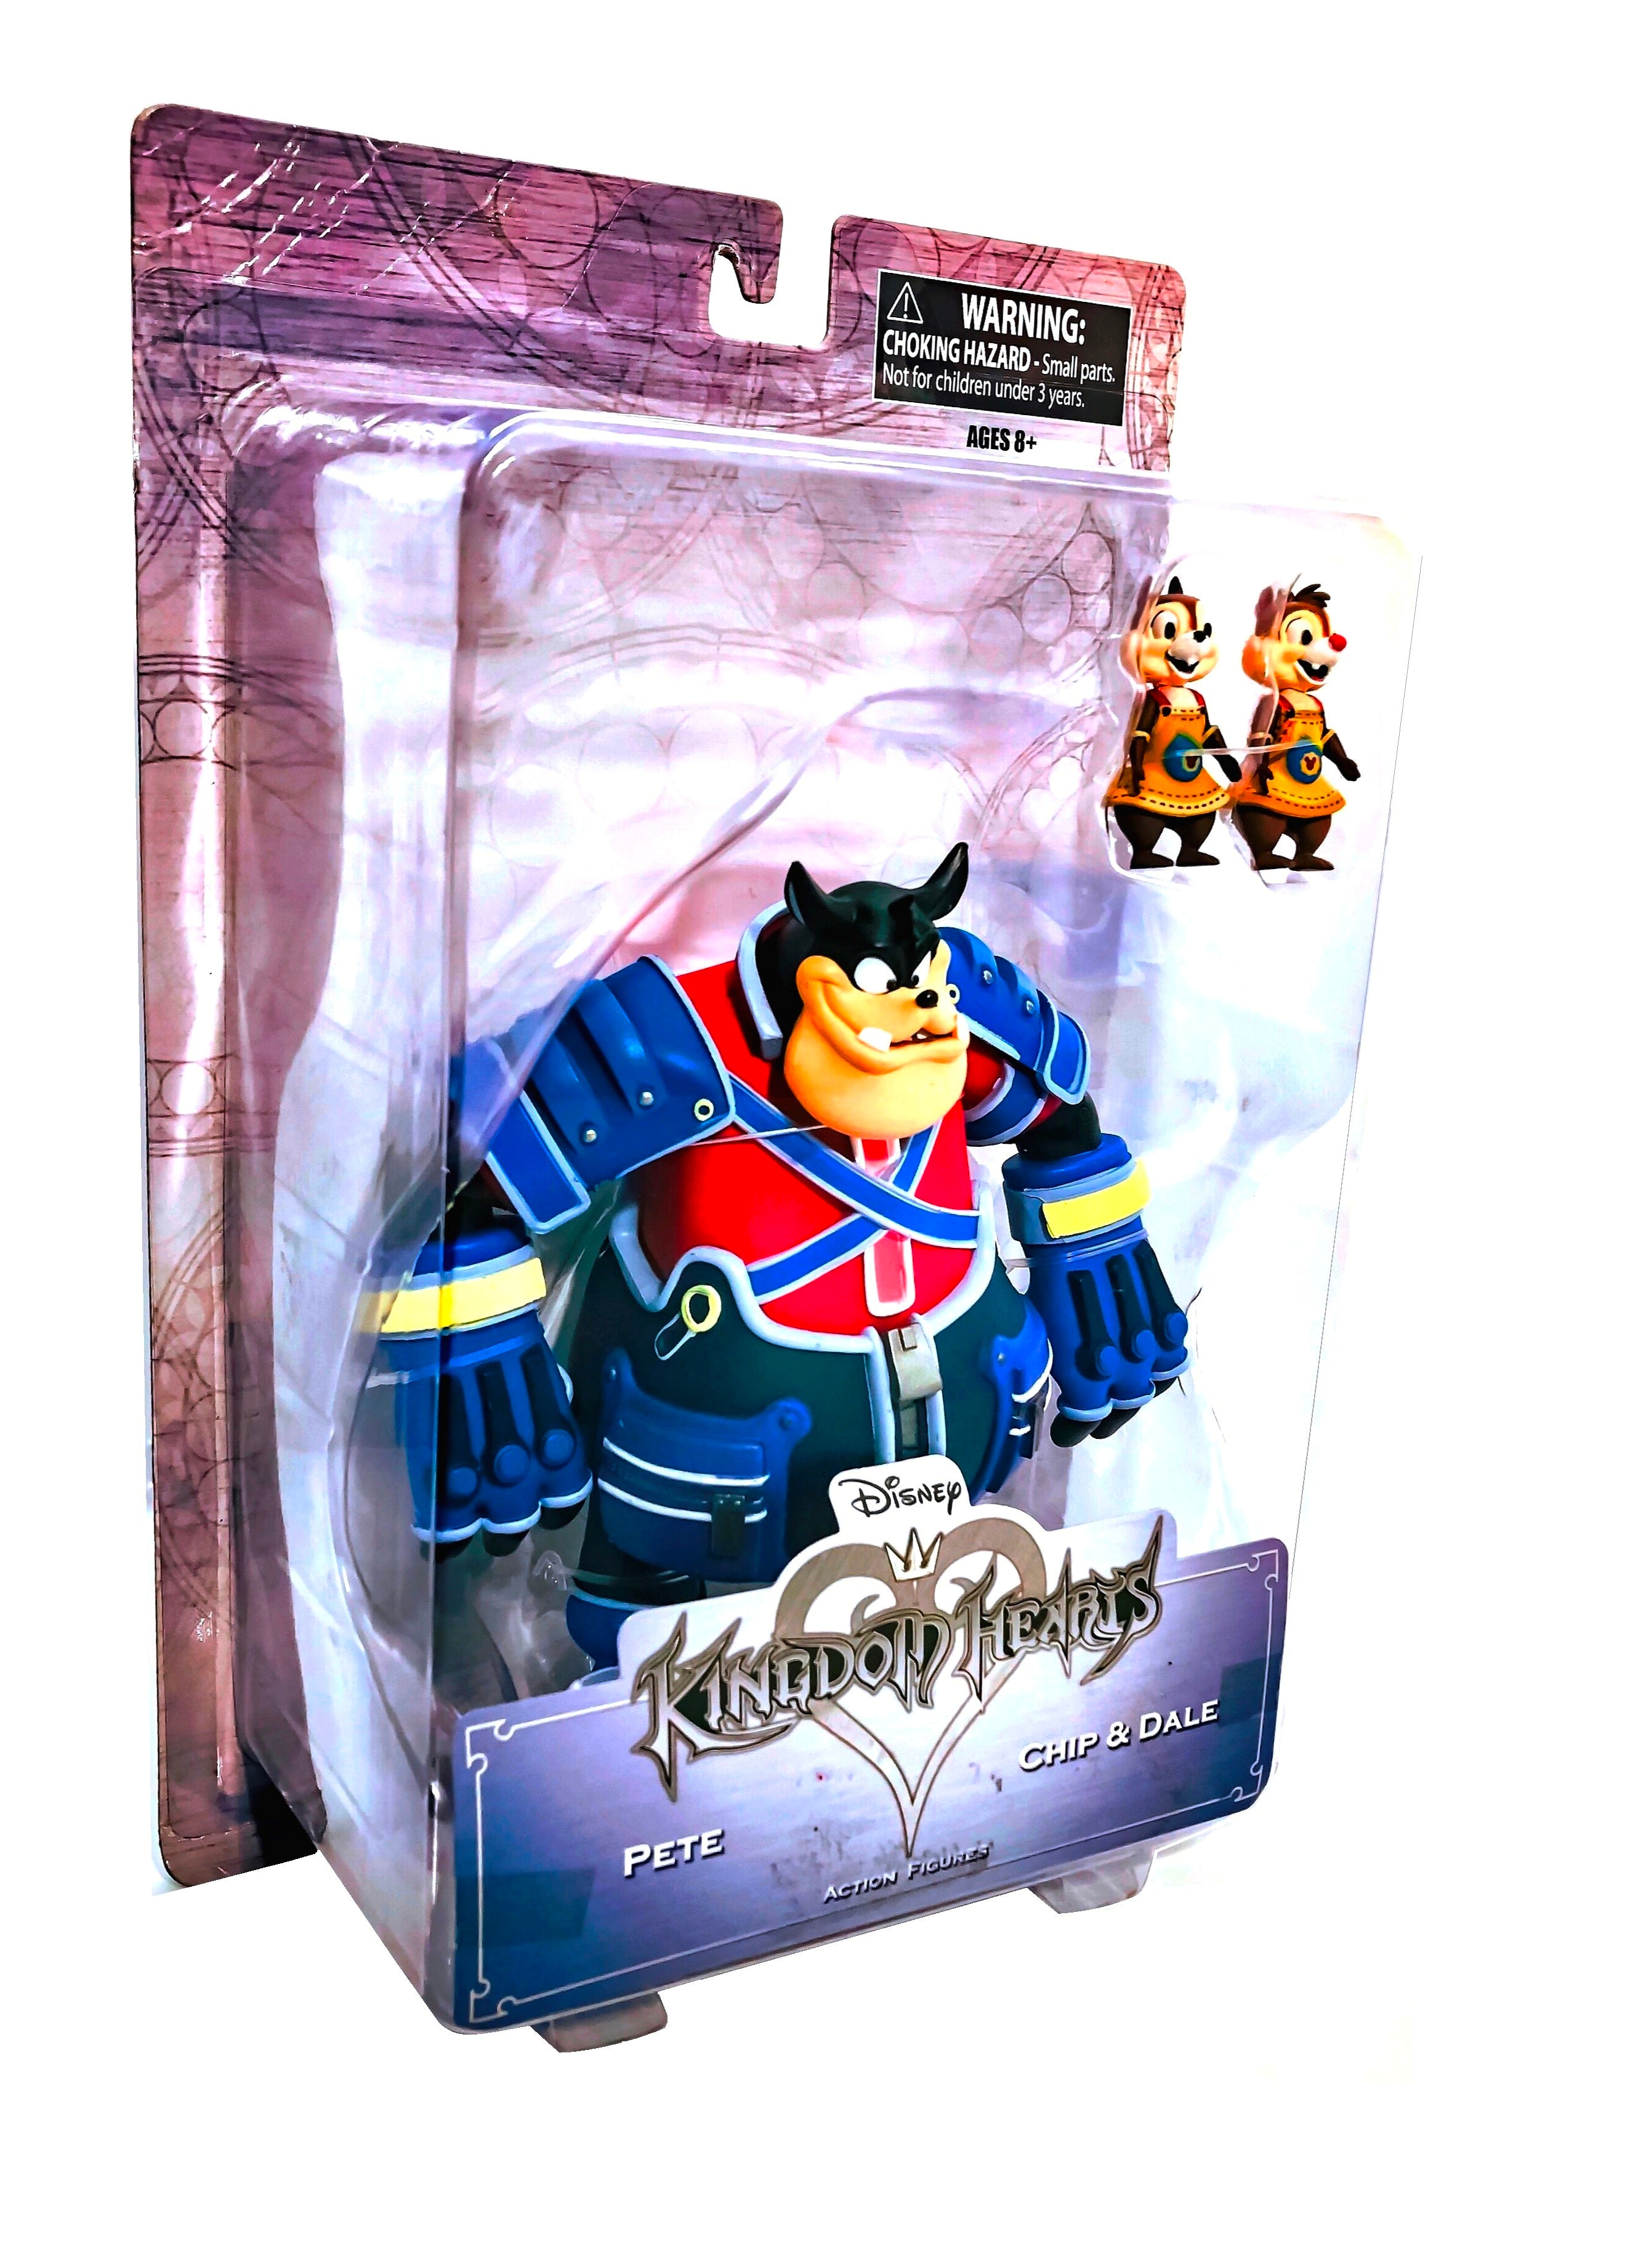 Kingdom Hearts Pete with Chip & Dale | Diamond Select Toys